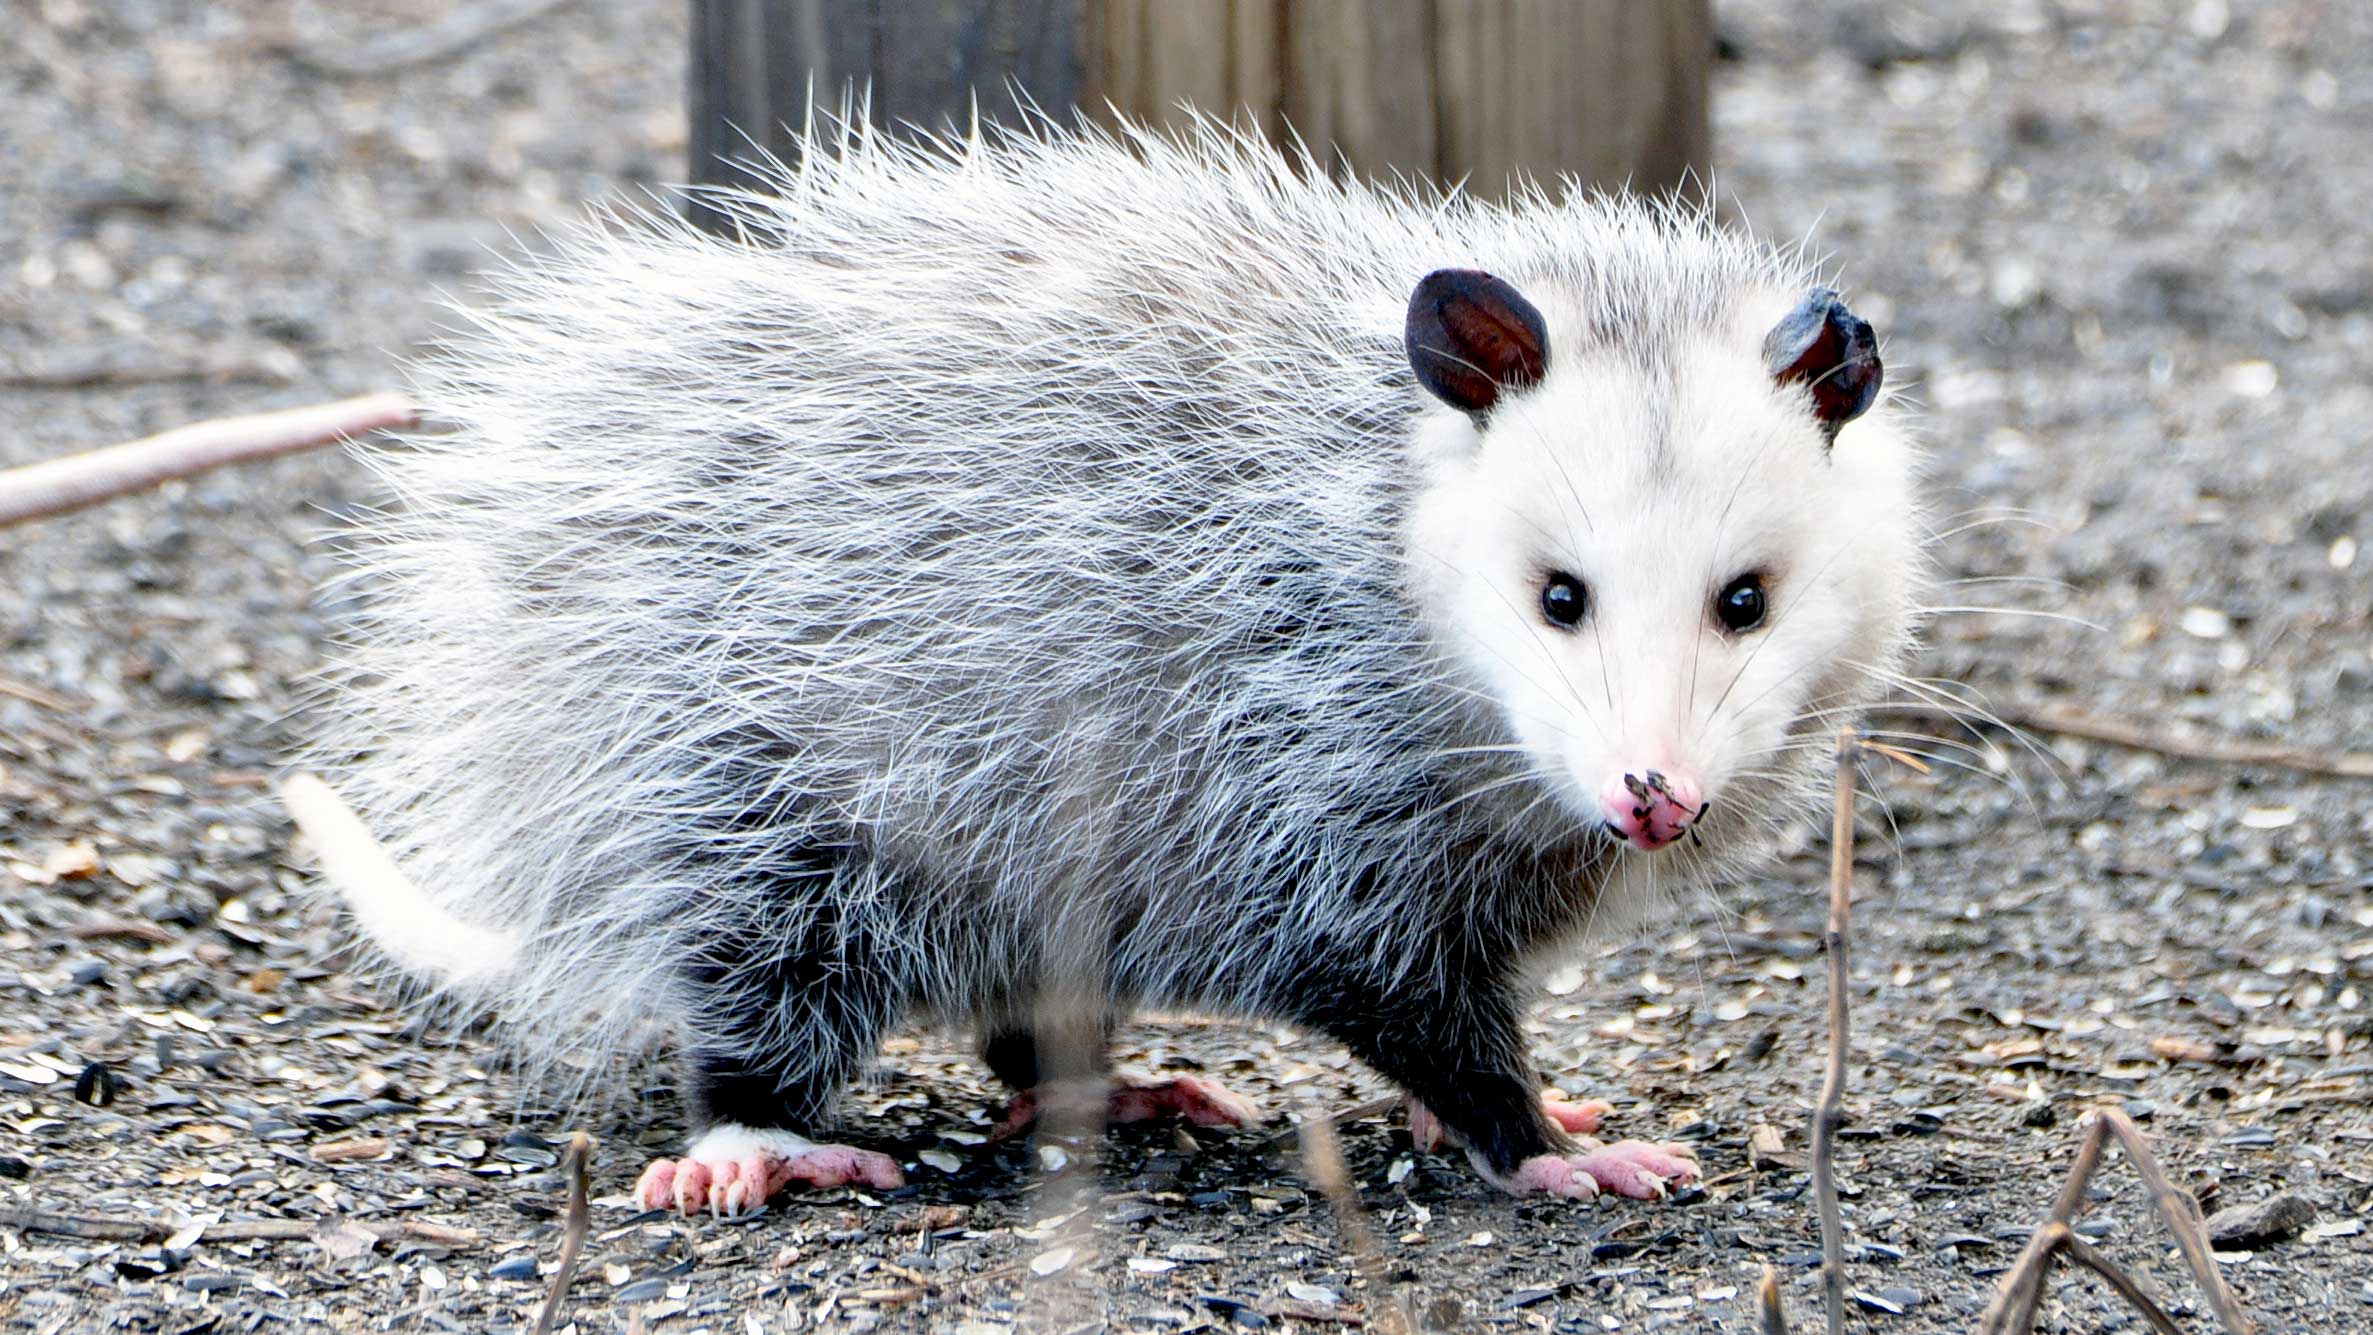 An opossum looking at the camera.